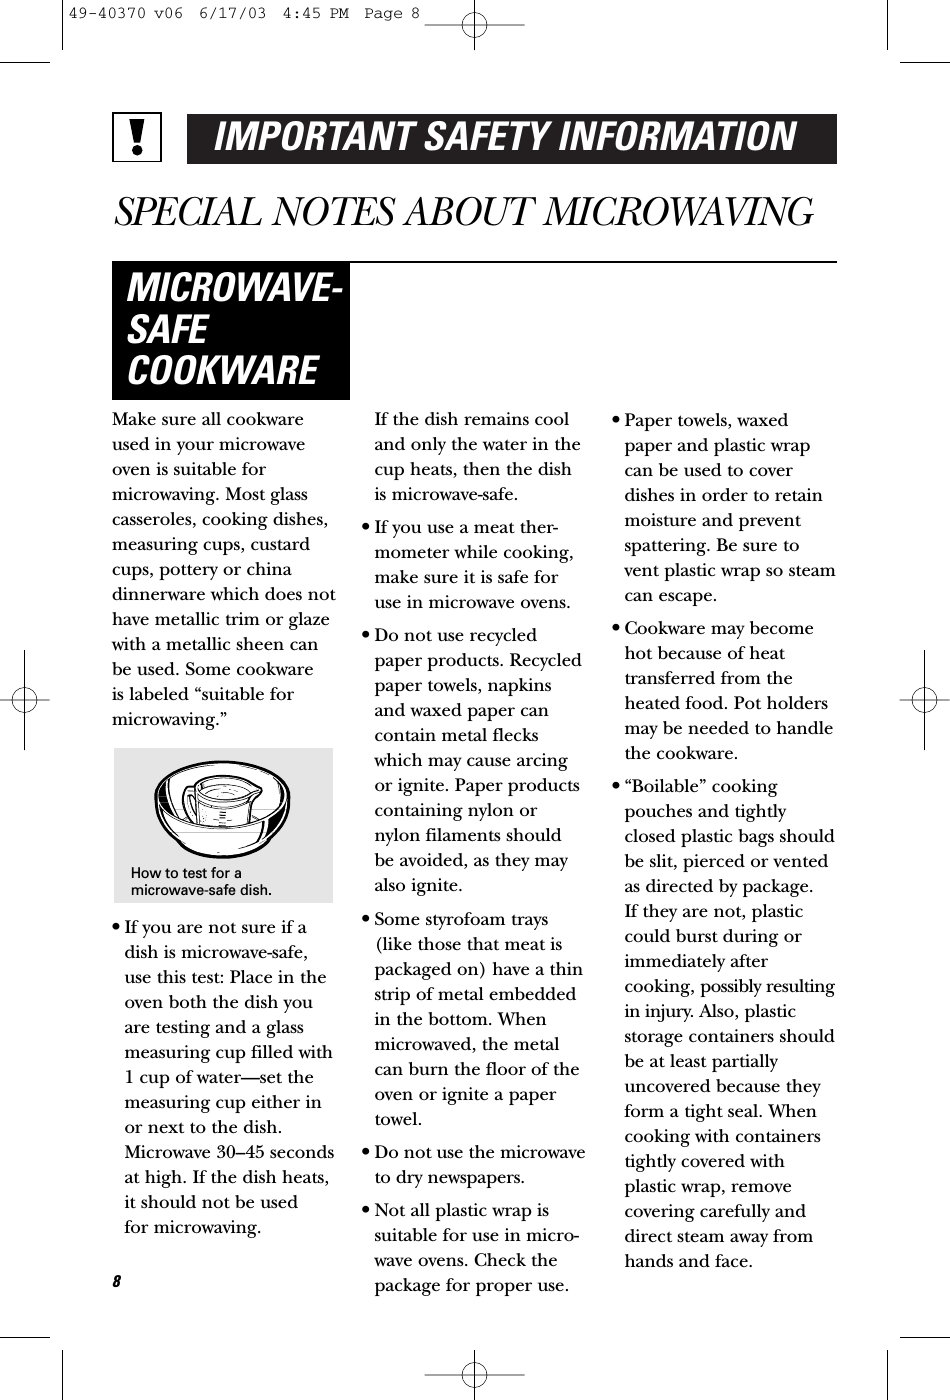 IMPORTANT SAFETY INFORMATIONSPECIAL NOTES ABOUT MICROWAVINGMake sure all cookwareused in your microwaveoven is suitable formicrowaving. Most glasscasseroles, cooking dishes,measuring cups, custardcups, pottery or chinadinnerware which does nothave metallic trim or glazewith a metallic sheen canbe used. Some cookware is labeled “suitable formicrowaving.”•If you are not sure if adish is microwave-safe,use this test: Place in theoven both the dish youare testing and a glassmeasuring cup filled with1 cup of water—set themeasuring cup either inor next to the dish.Microwave 30–45 secondsat high. If the dish heats, it should not be used for microwaving. If the dish remains cooland only the water in thecup heats, then the dishis microwave-safe.•If you use a meat ther-mometer while cooking,make sure it is safe foruse in microwave ovens.•Do not use recycledpaper products. Recycledpaper towels, napkinsand waxed paper cancontain metal fleckswhich may cause arcingor ignite. Paper productscontaining nylon ornylon filaments shouldbe avoided, as they mayalso ignite. •Some styrofoam trays(like those that meat ispackaged on) have a thinstrip of metal embeddedin the bottom. Whenmicrowaved, the metalcan burn the floor of theoven or ignite a papertowel.•Do not use the microwaveto dry newspapers.•Not all plastic wrap issuitable for use in micro-wave ovens. Check thepackage for proper use.•Paper towels, waxedpaper and plastic wrapcan be used to coverdishes in order to retainmoisture and preventspattering. Be sure tovent plastic wrap so steamcan escape.•Cookware may becomehot because of heattransferred from theheated food. Pot holdersmay be needed to handlethe cookware.•“Boilable” cookingpouches and tightlyclosed plastic bags shouldbe slit, pierced or ventedas directed by package. If they are not, plasticcould burst during orimmediately aftercooking, possibly resultingin injury. Also, plasticstorage containers shouldbe at least partiallyuncovered because theyform a tight seal. Whencooking with containerstightly covered withplastic wrap, removecovering carefully anddirect steam away fromhands and face.MICROWAVE-SAFECOOKWARE8How to test for amicrowave-safe dish.49-40370 v06  6/17/03  4:45 PM  Page 8